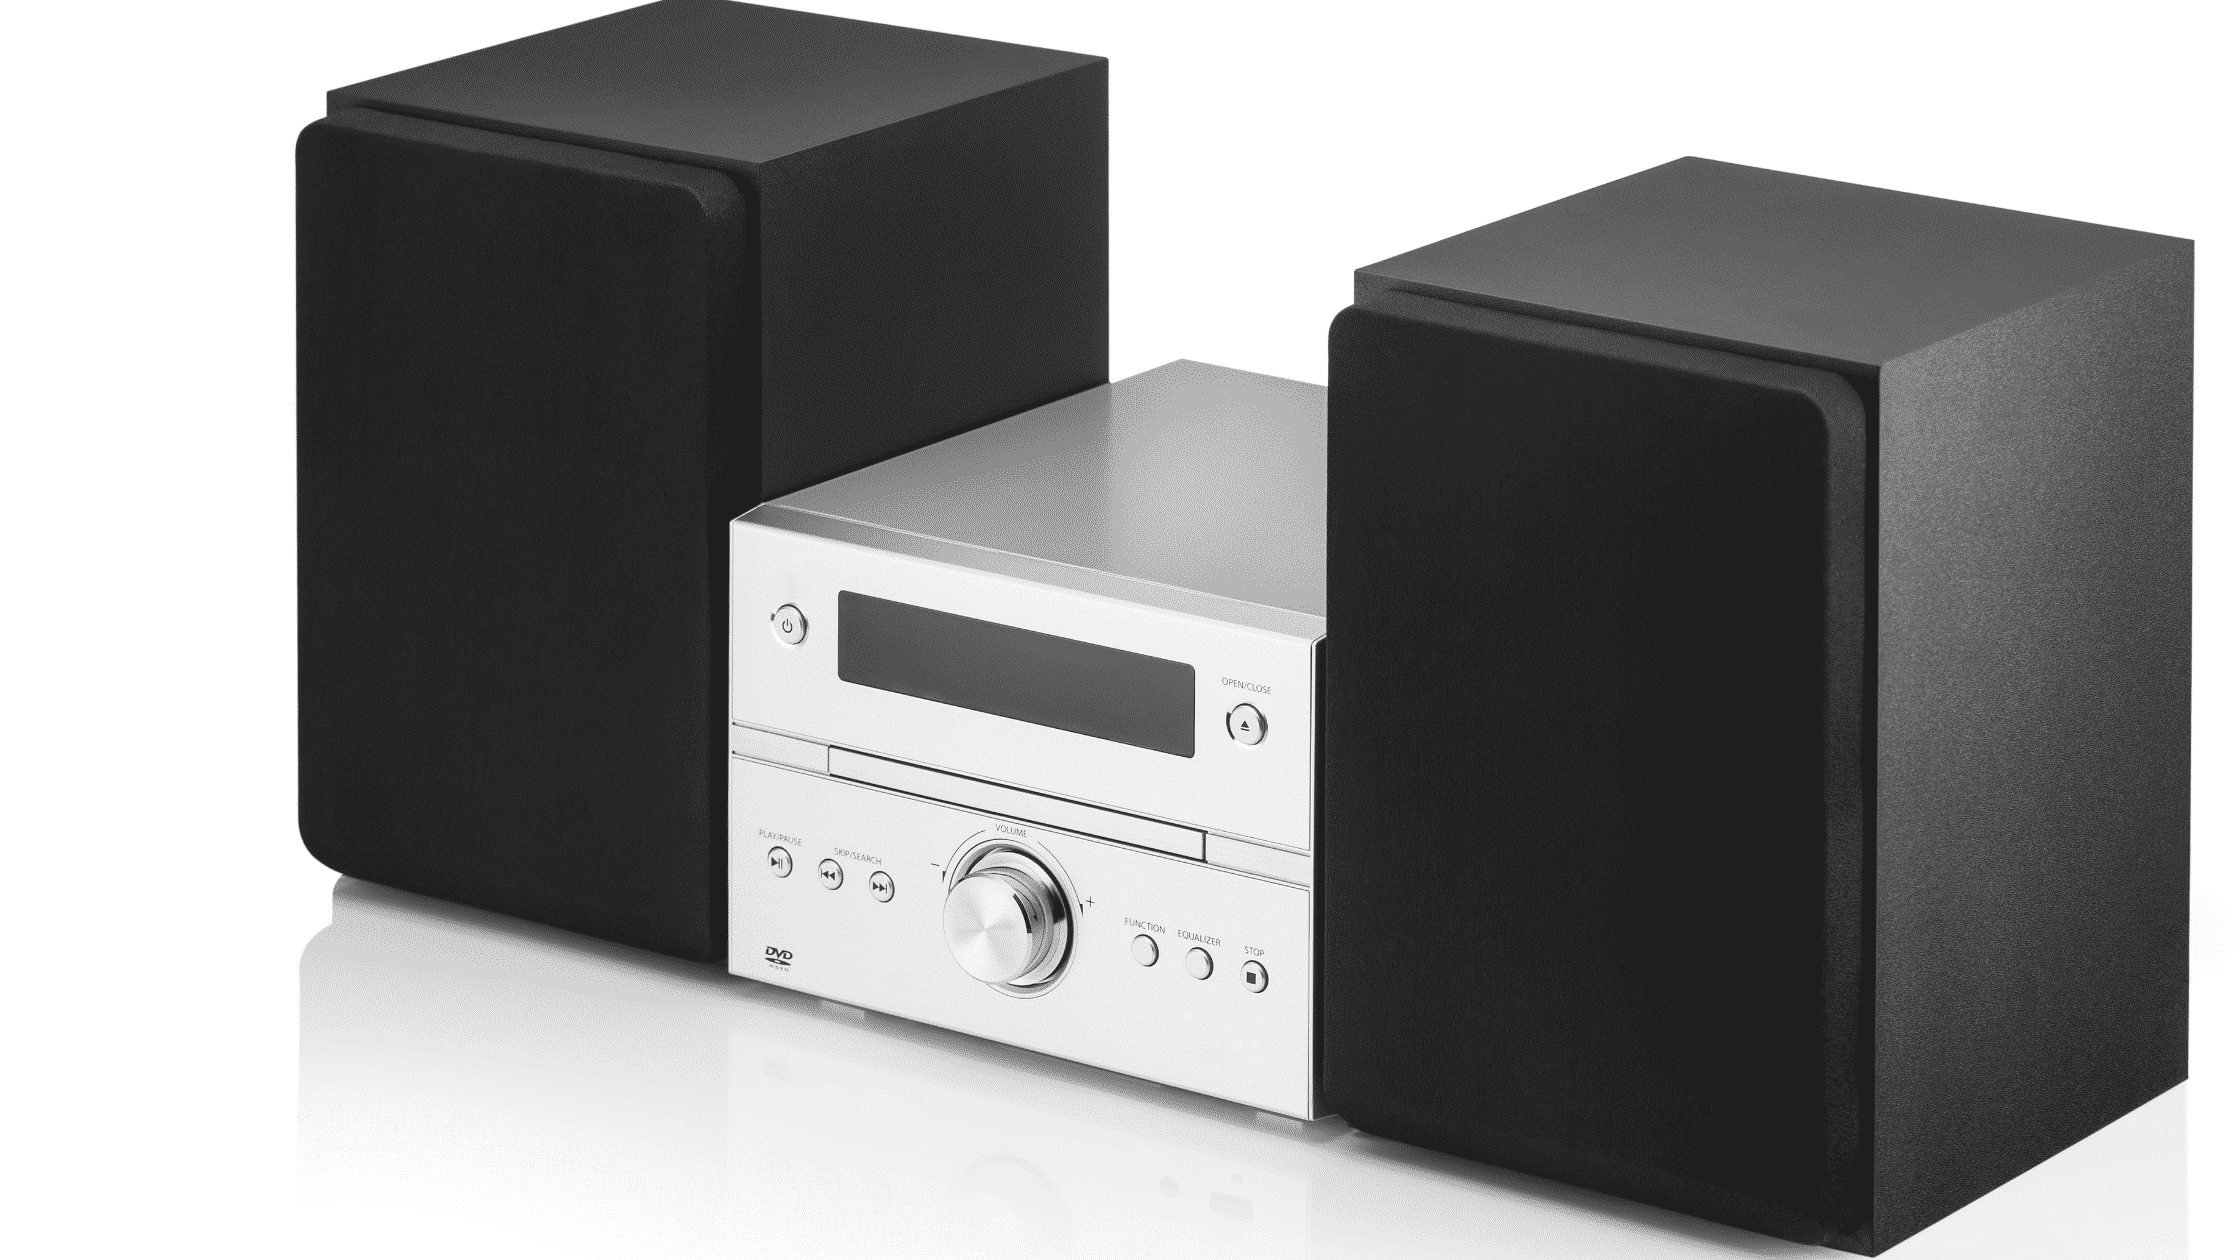 Best Home Stereo Systems for Your Office or Small Space